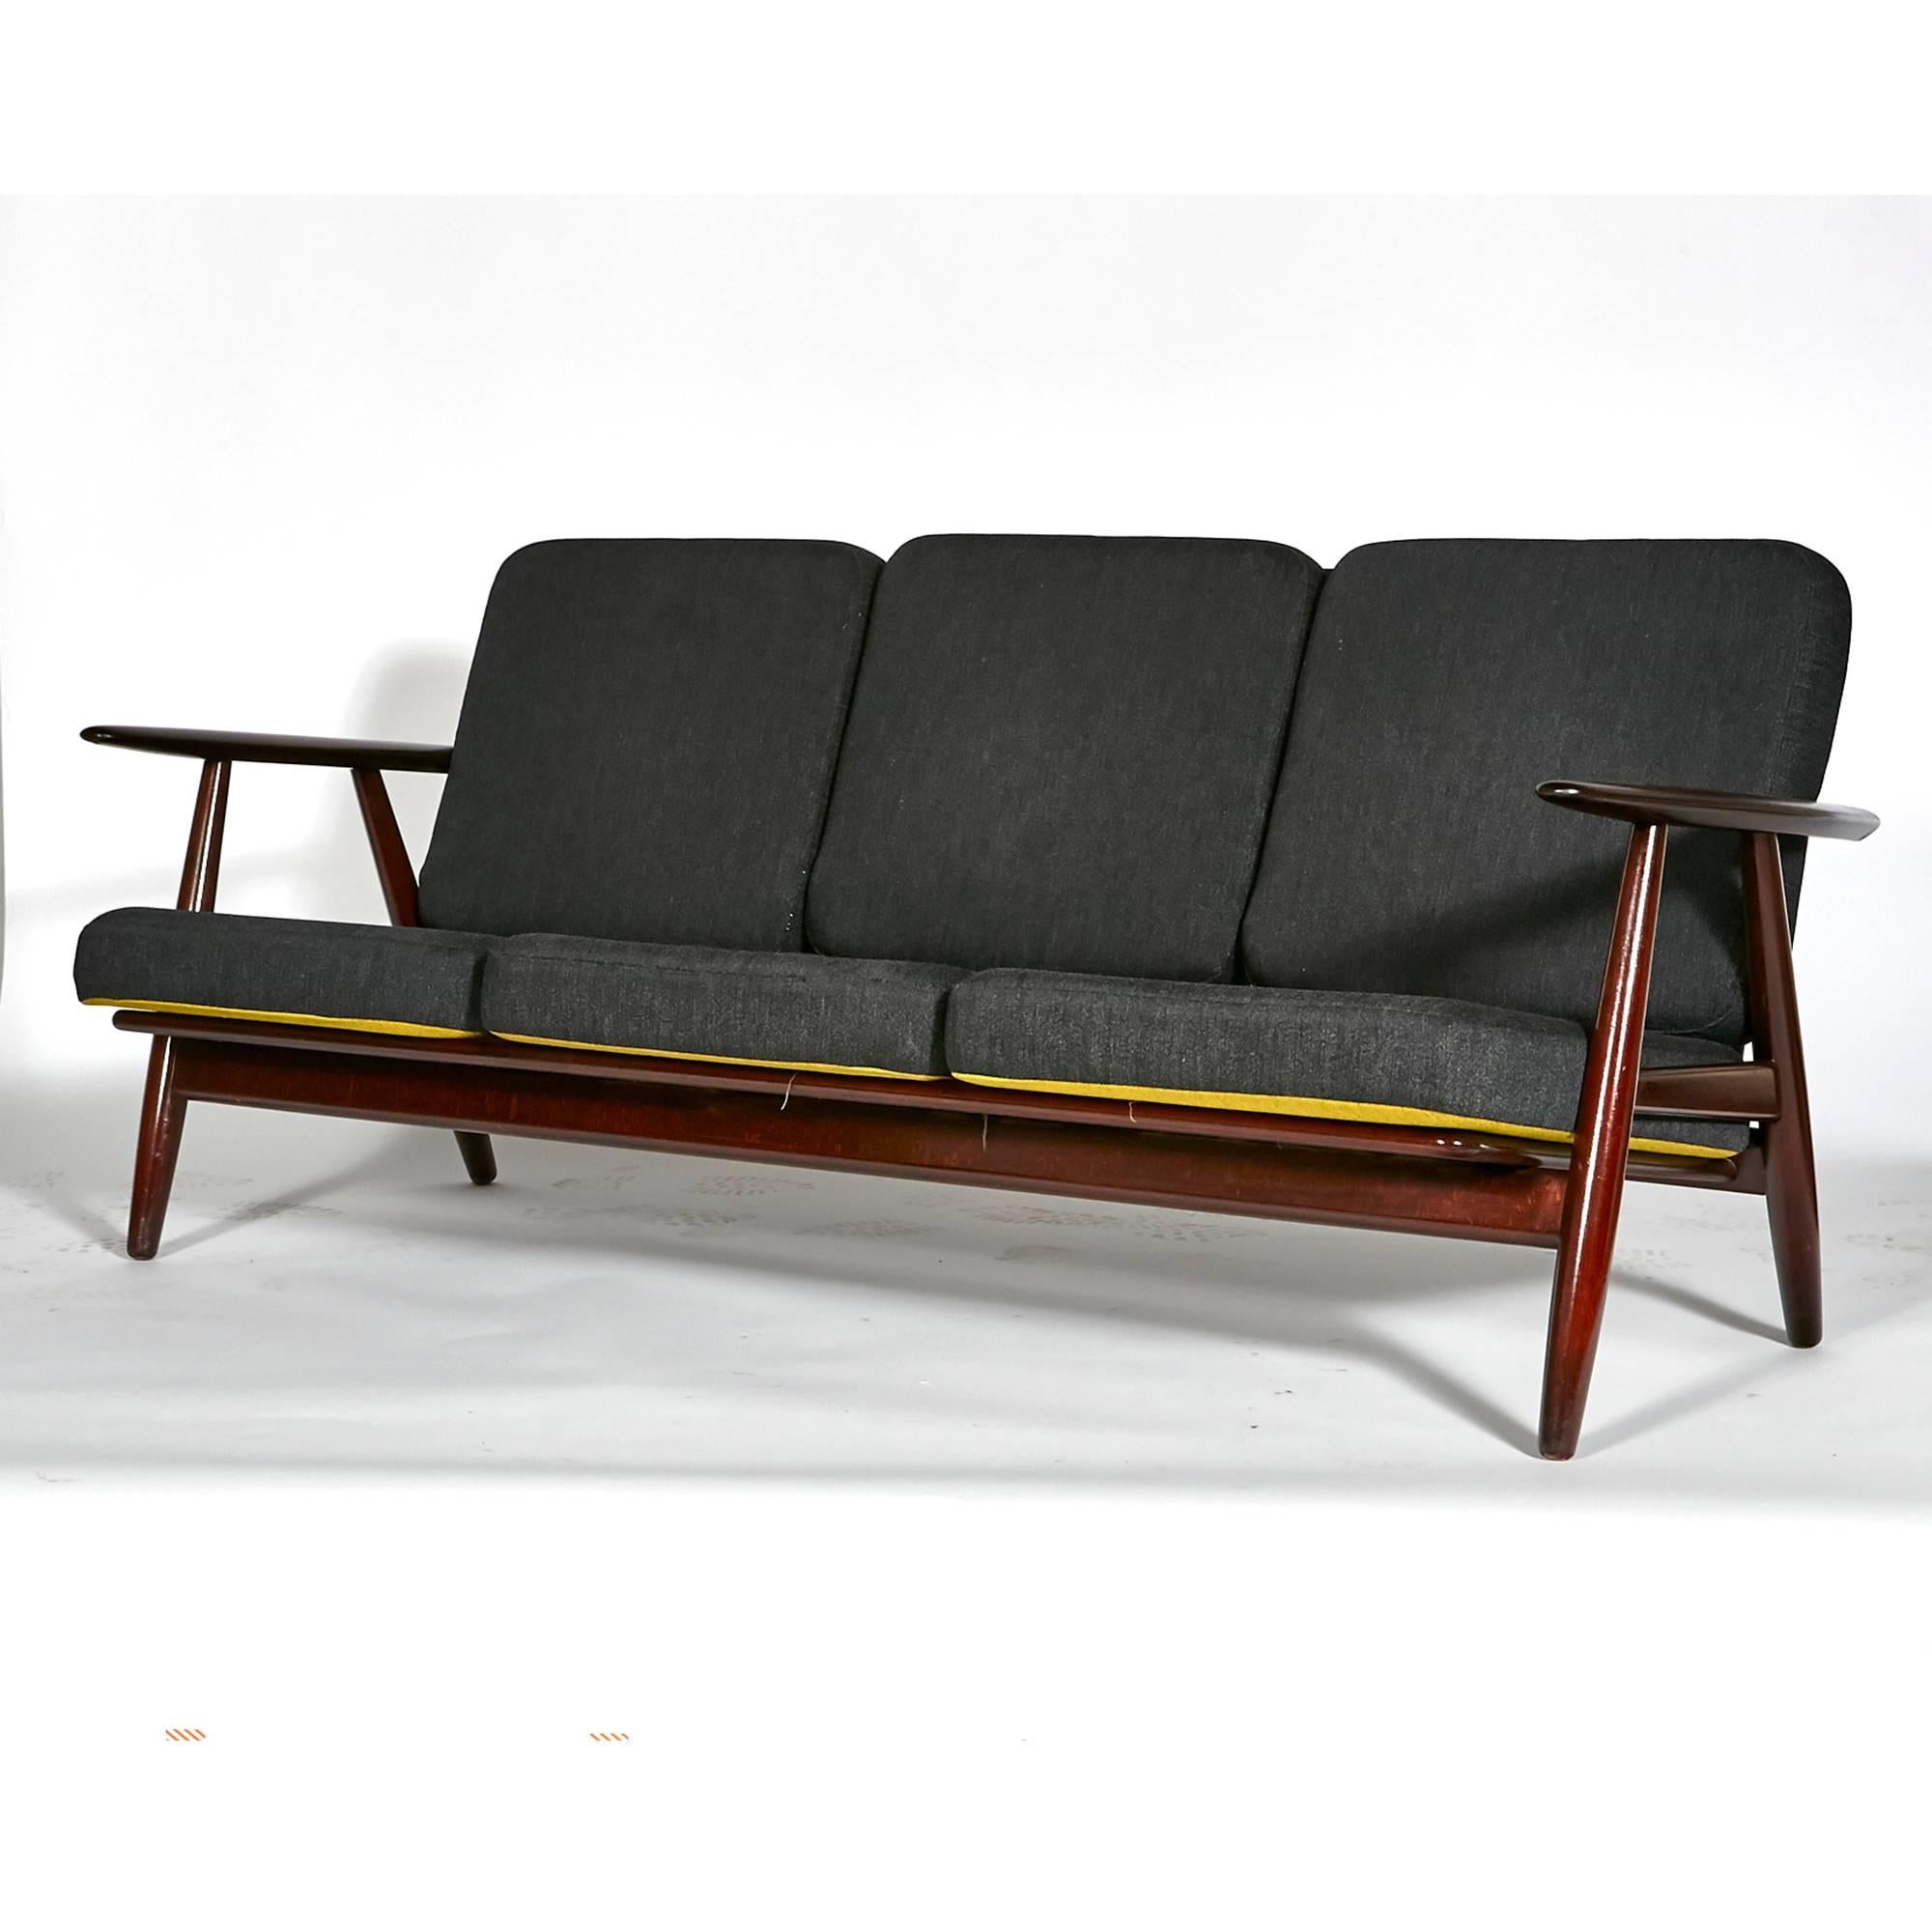 Vintage 1960s Hans J. Wegner for GETAMA Denmark cigar three seat sofa with reversible cushions. The sofa is in ash with a dark wood stain. Marked.